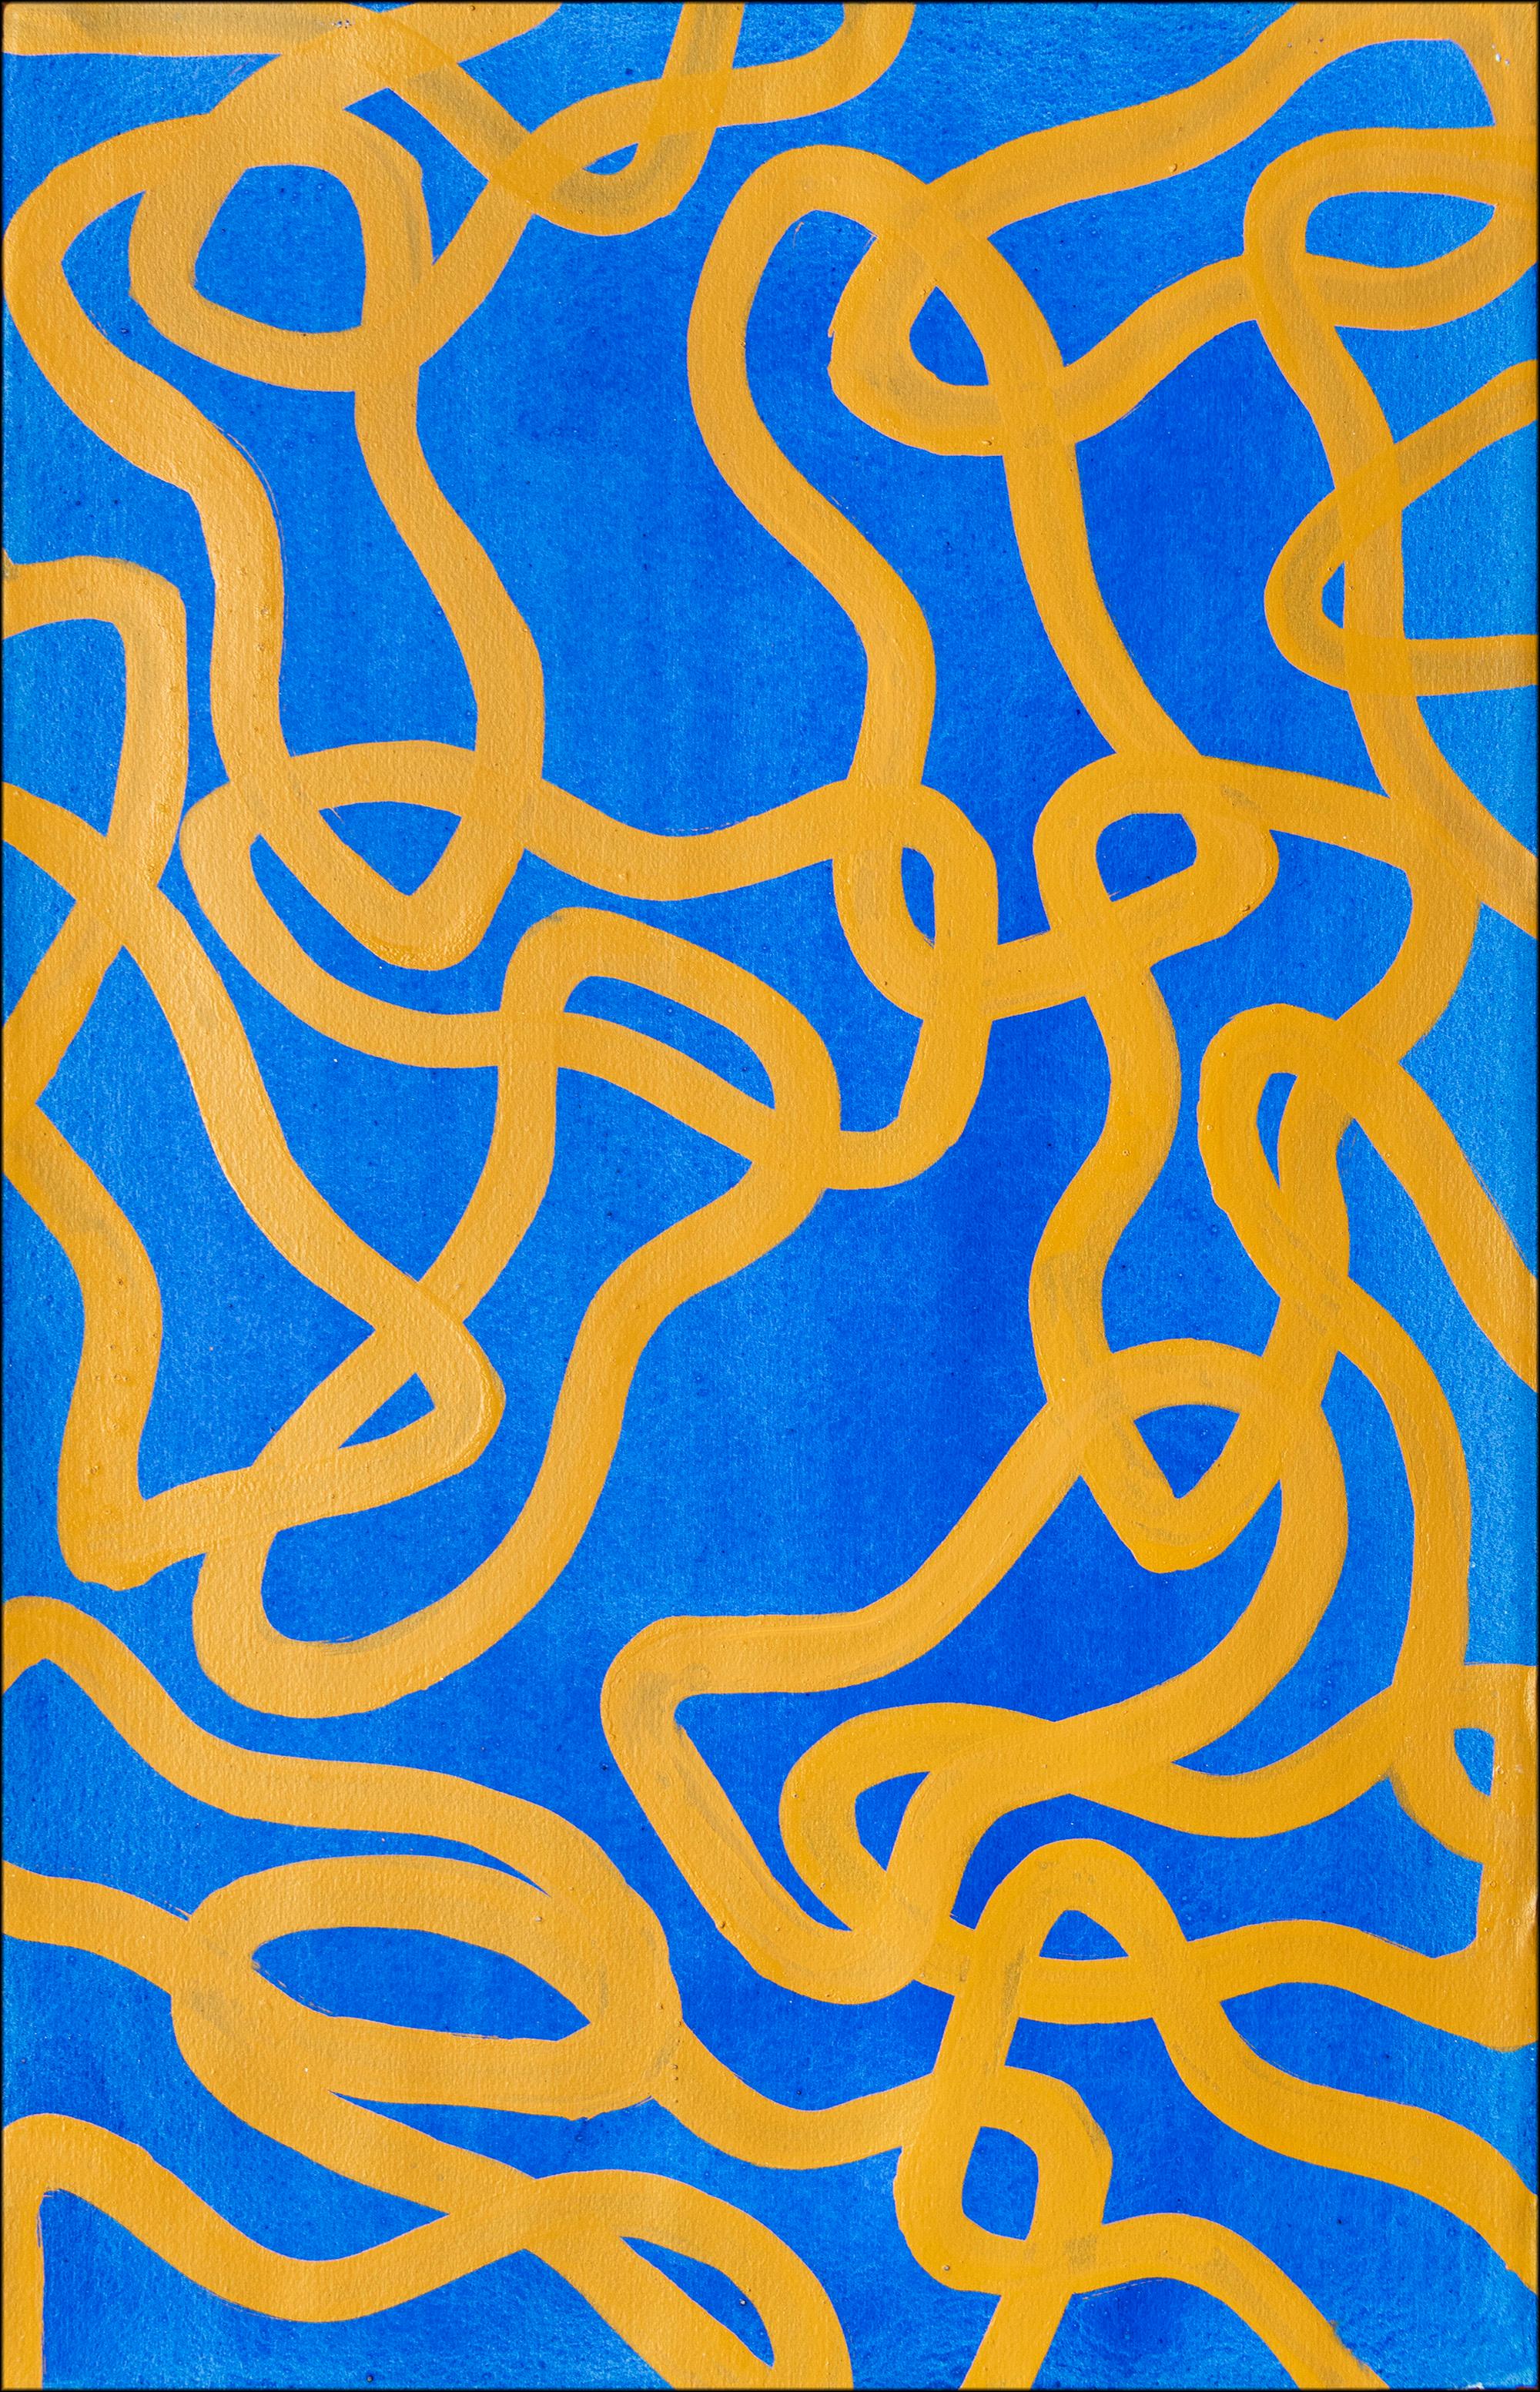 Salty N 2 & 4, Yellow, Blue Diptych, Overlapping Abstract Fishes, Mediterranean For Sale 1